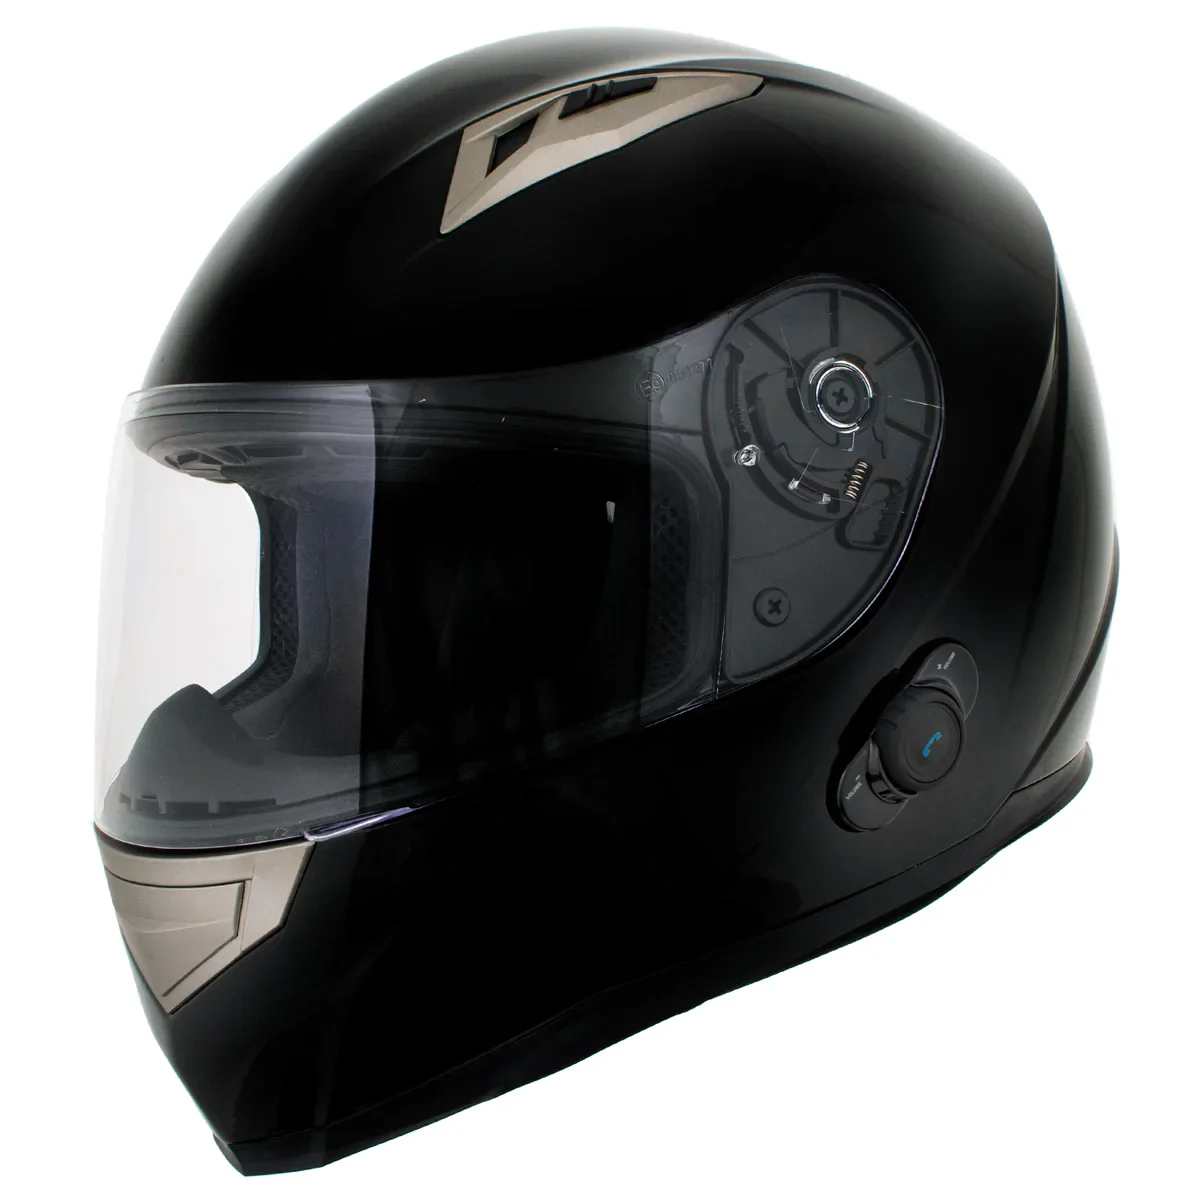 Image of Milwaukee Helmets H510 Gloss Black 'Chit-Chat' Black Full Face Motorcycle Helmet with Wireless Communication